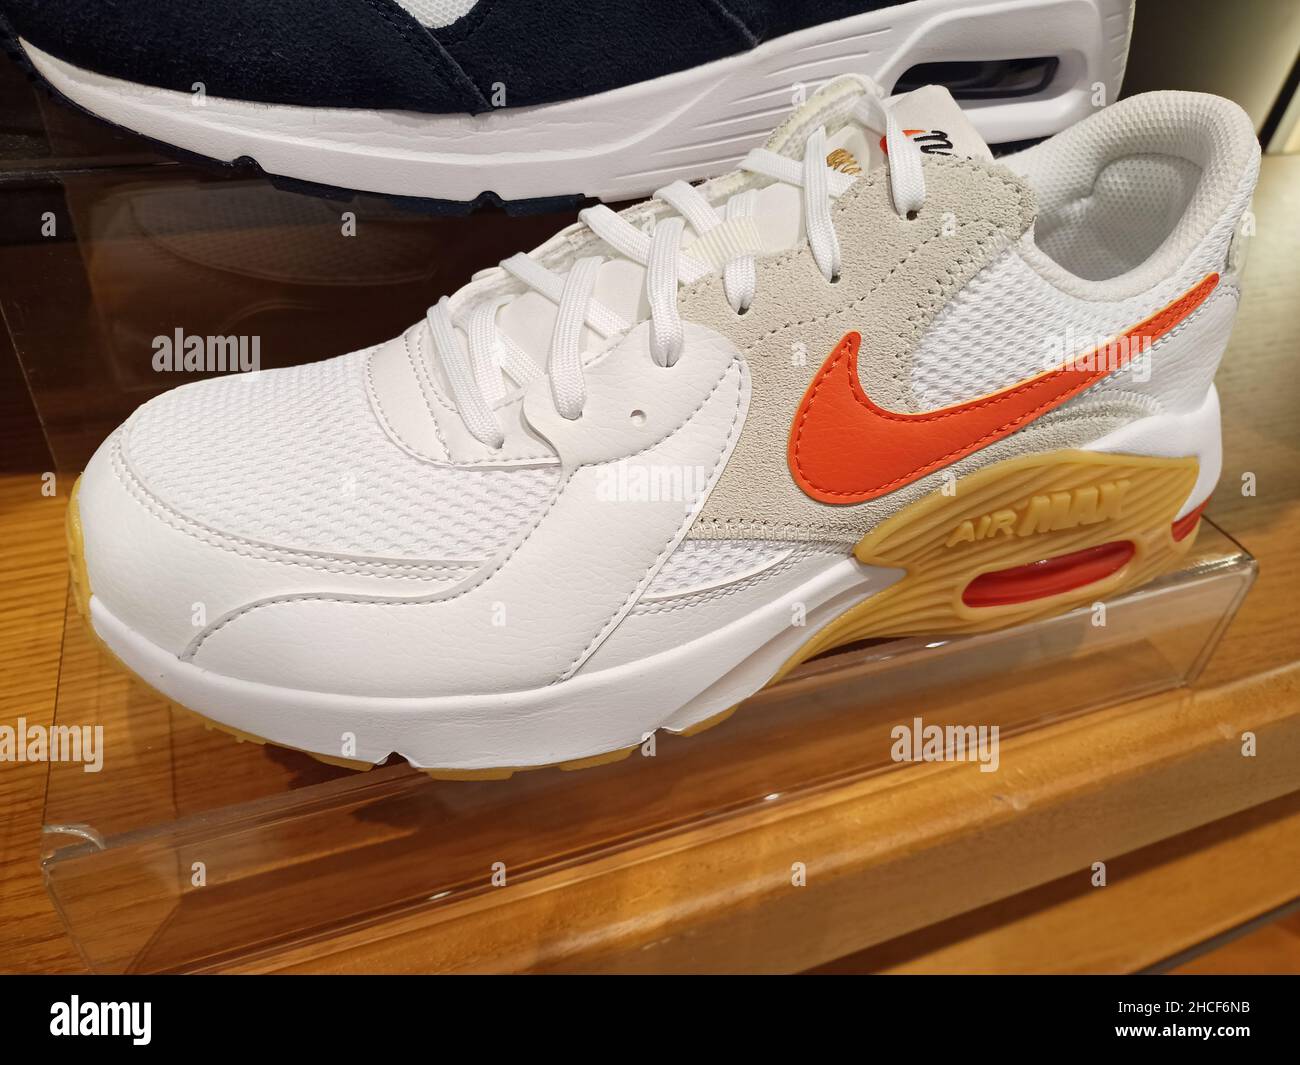 Gros plan d'une chaussure Nike air max blanche en magasin Photo Stock -  Alamy